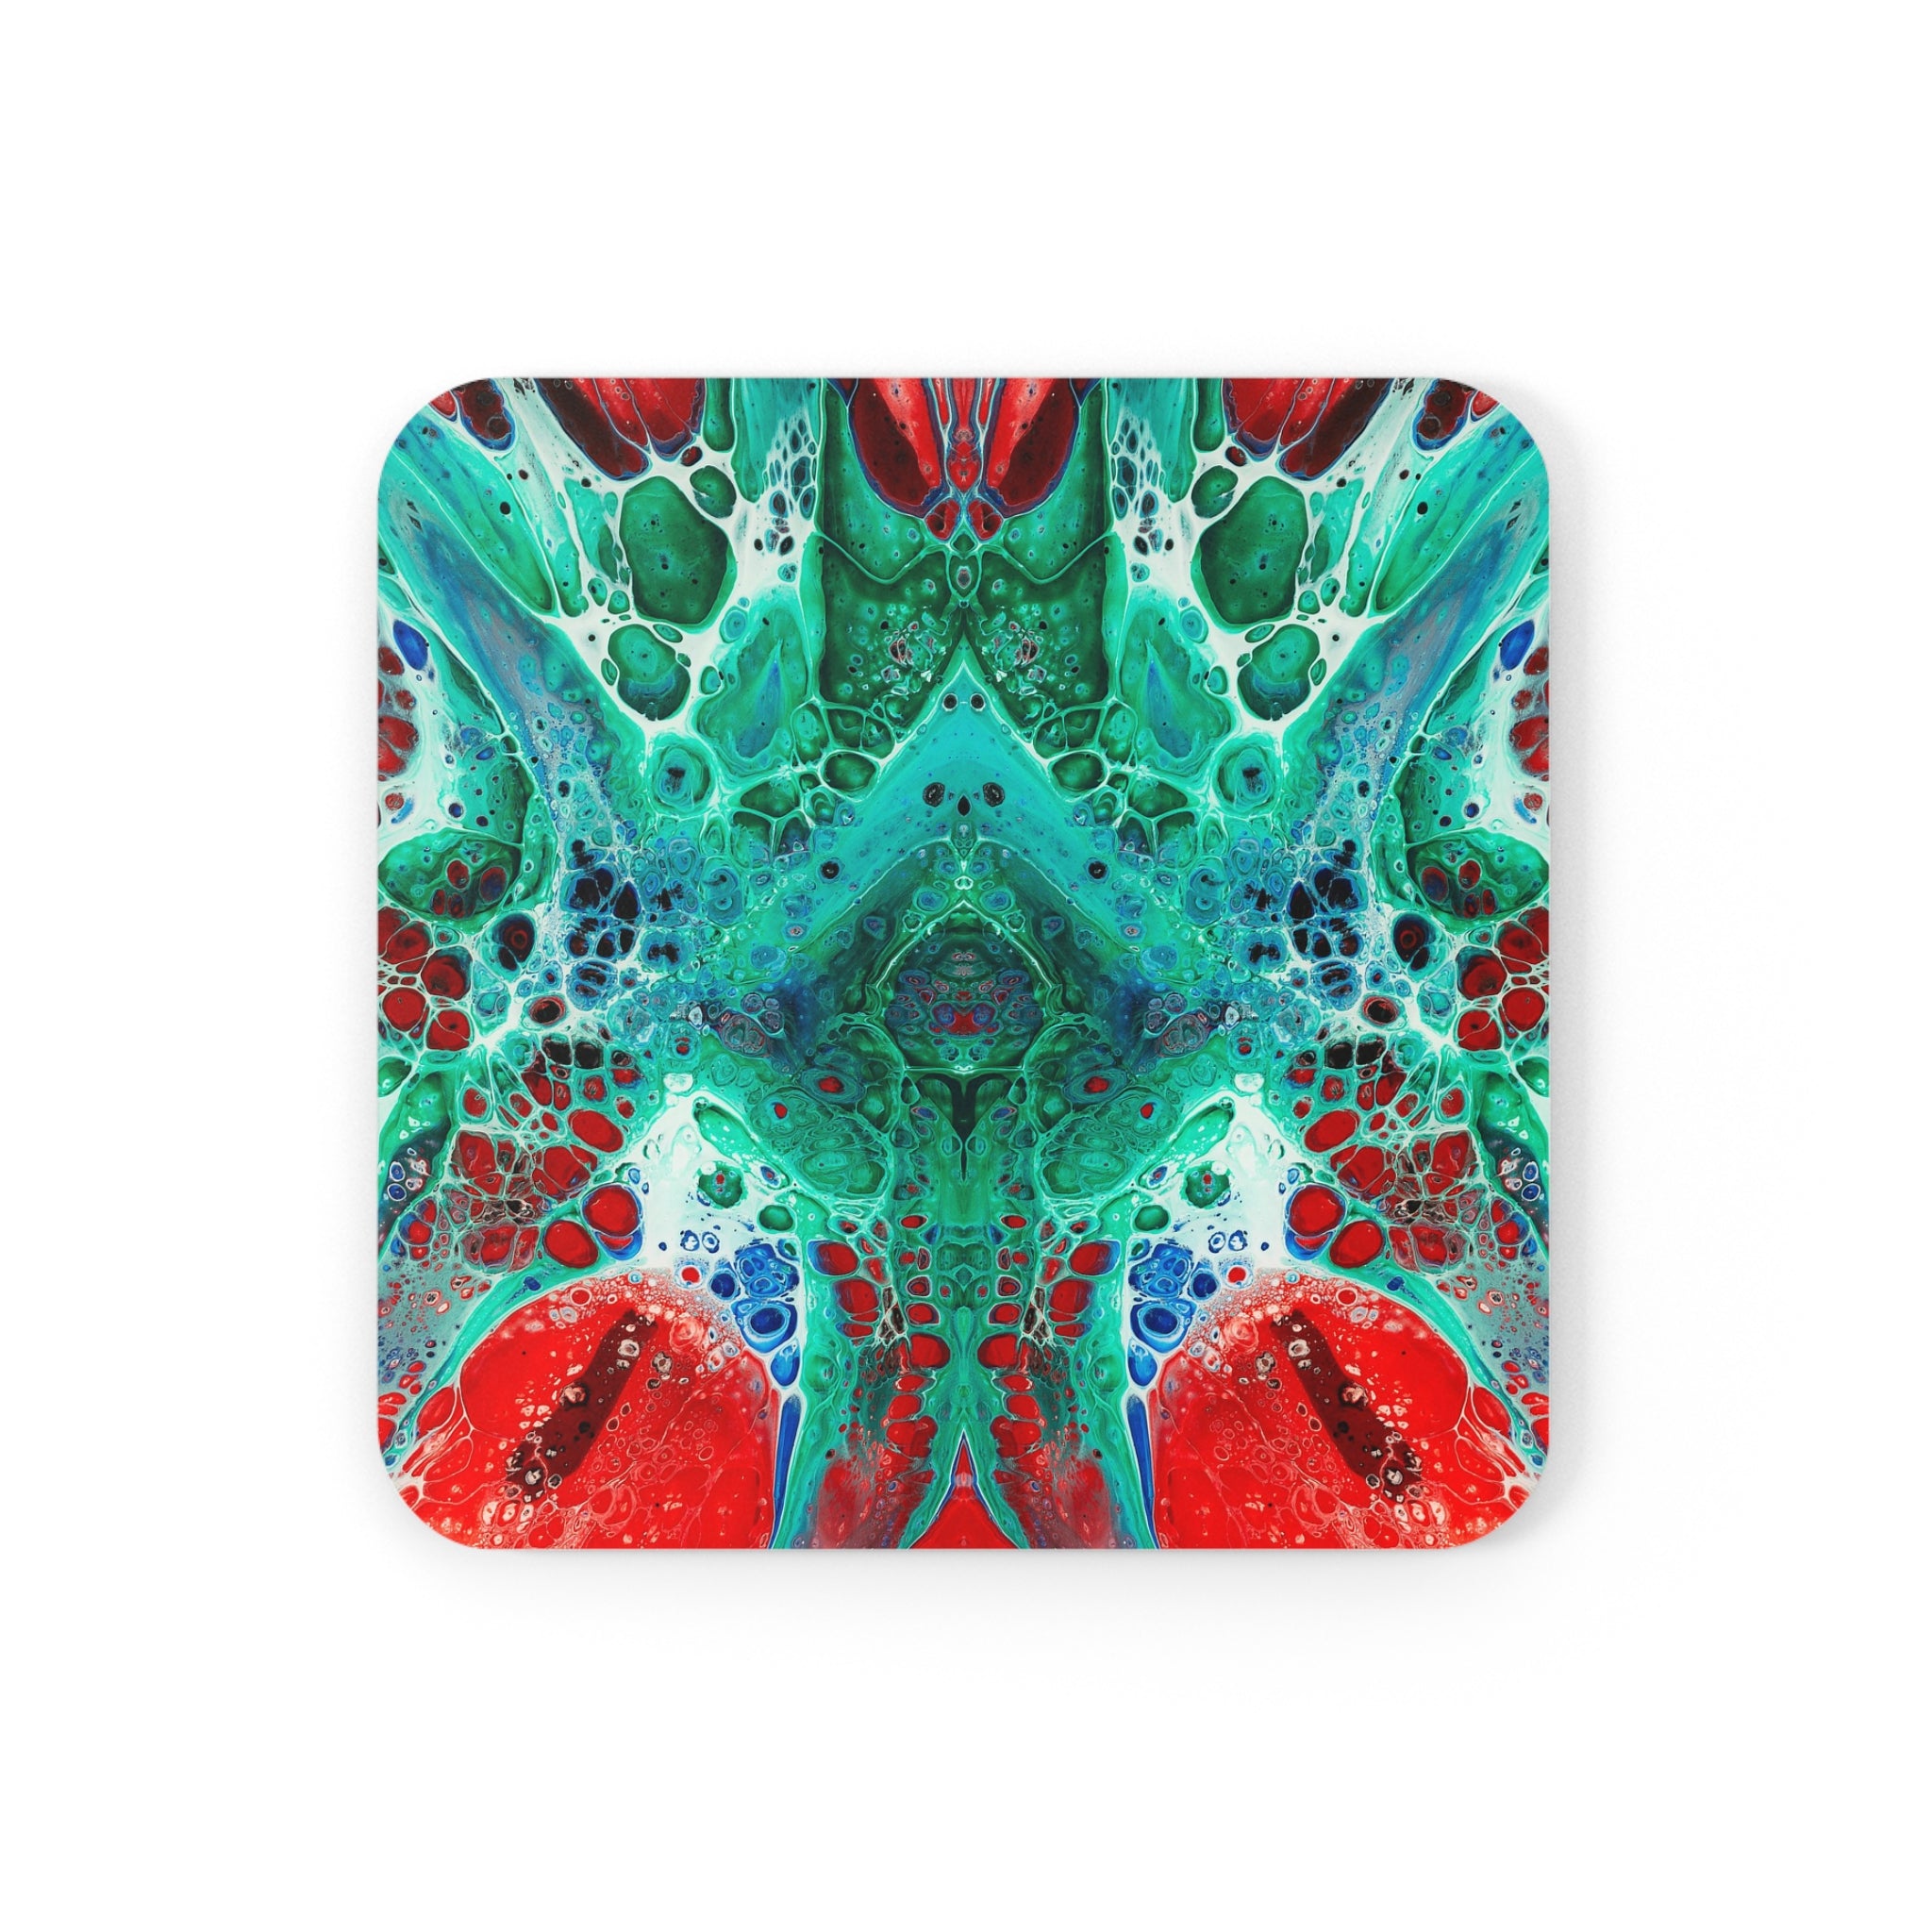 Cameron Creations - Convergence - Stylish Coffee Coaster - Square Front